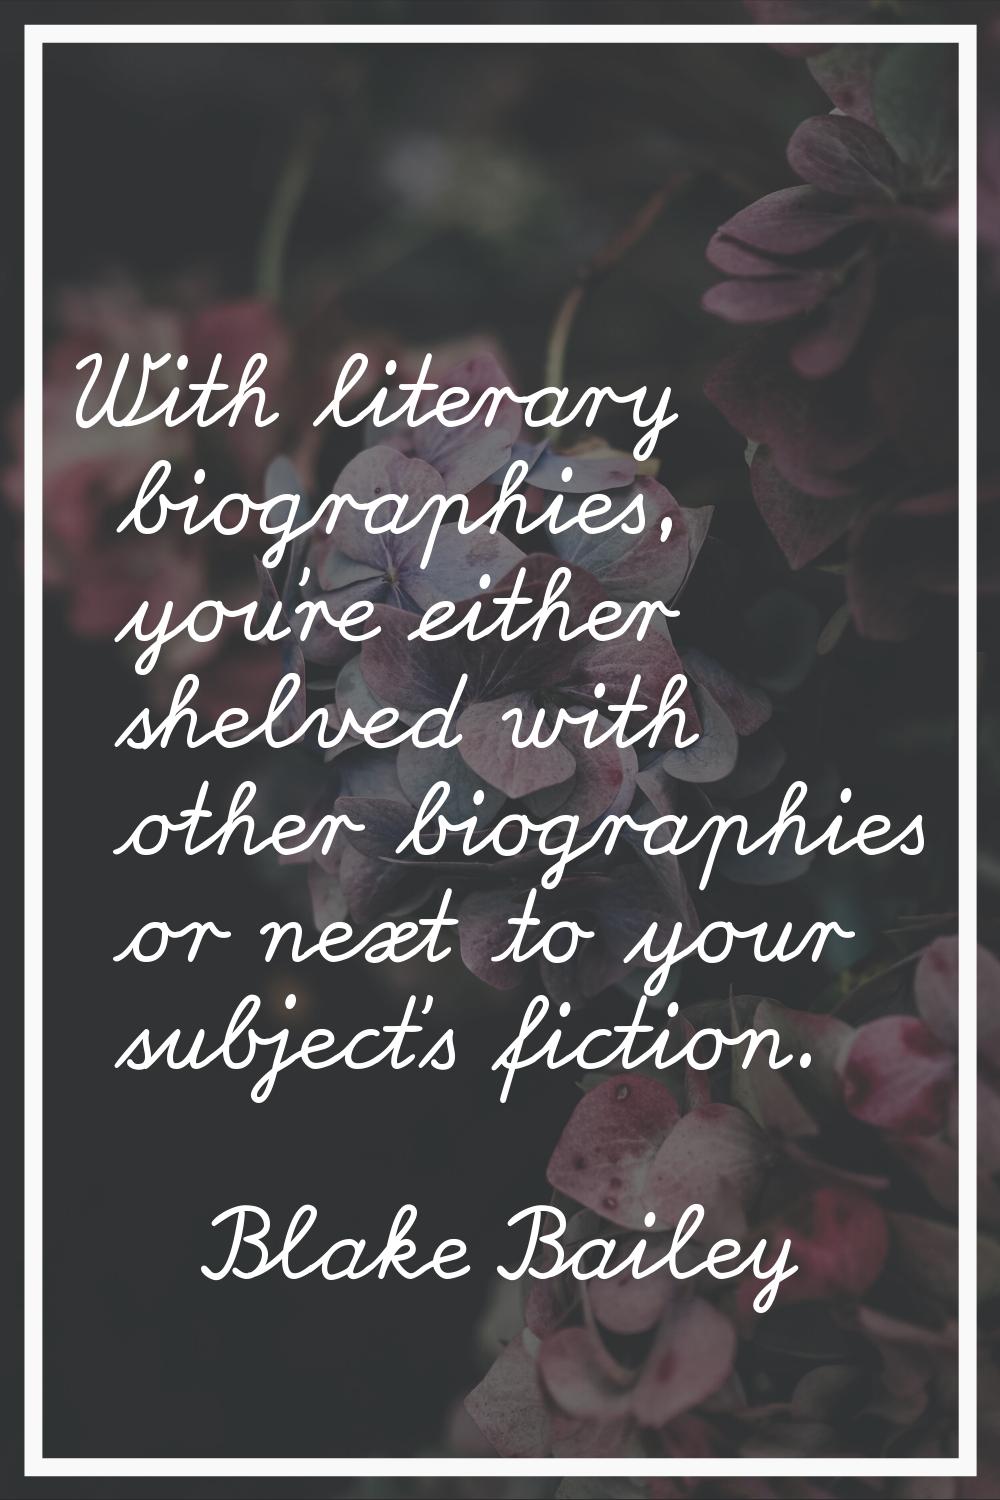 With literary biographies, you're either shelved with other biographies or next to your subject's f